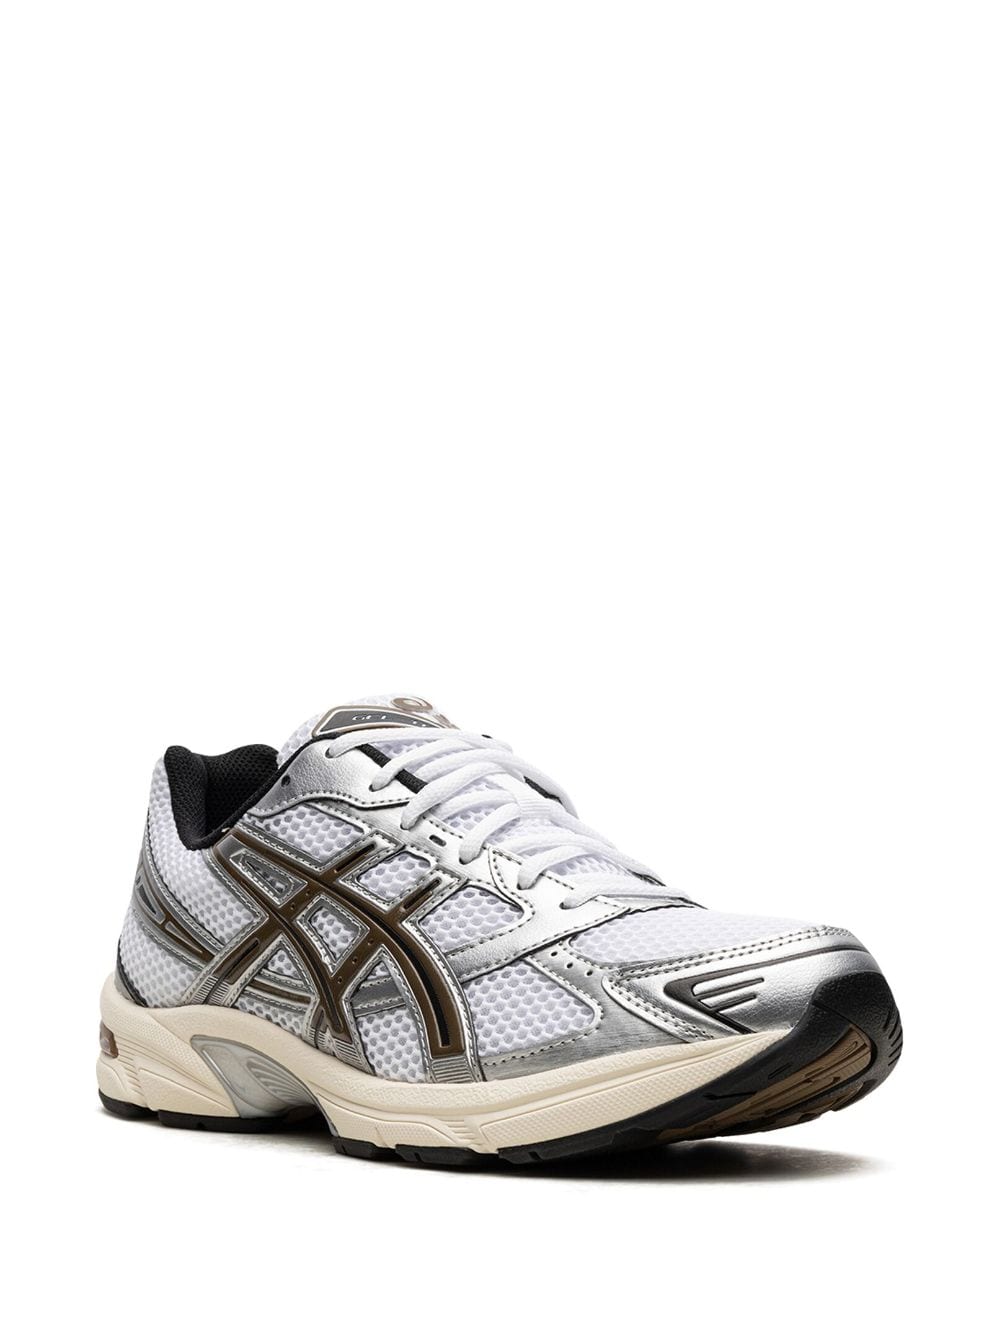 Image 2 of ASICS Gel-1130 "Canyon" sneakers